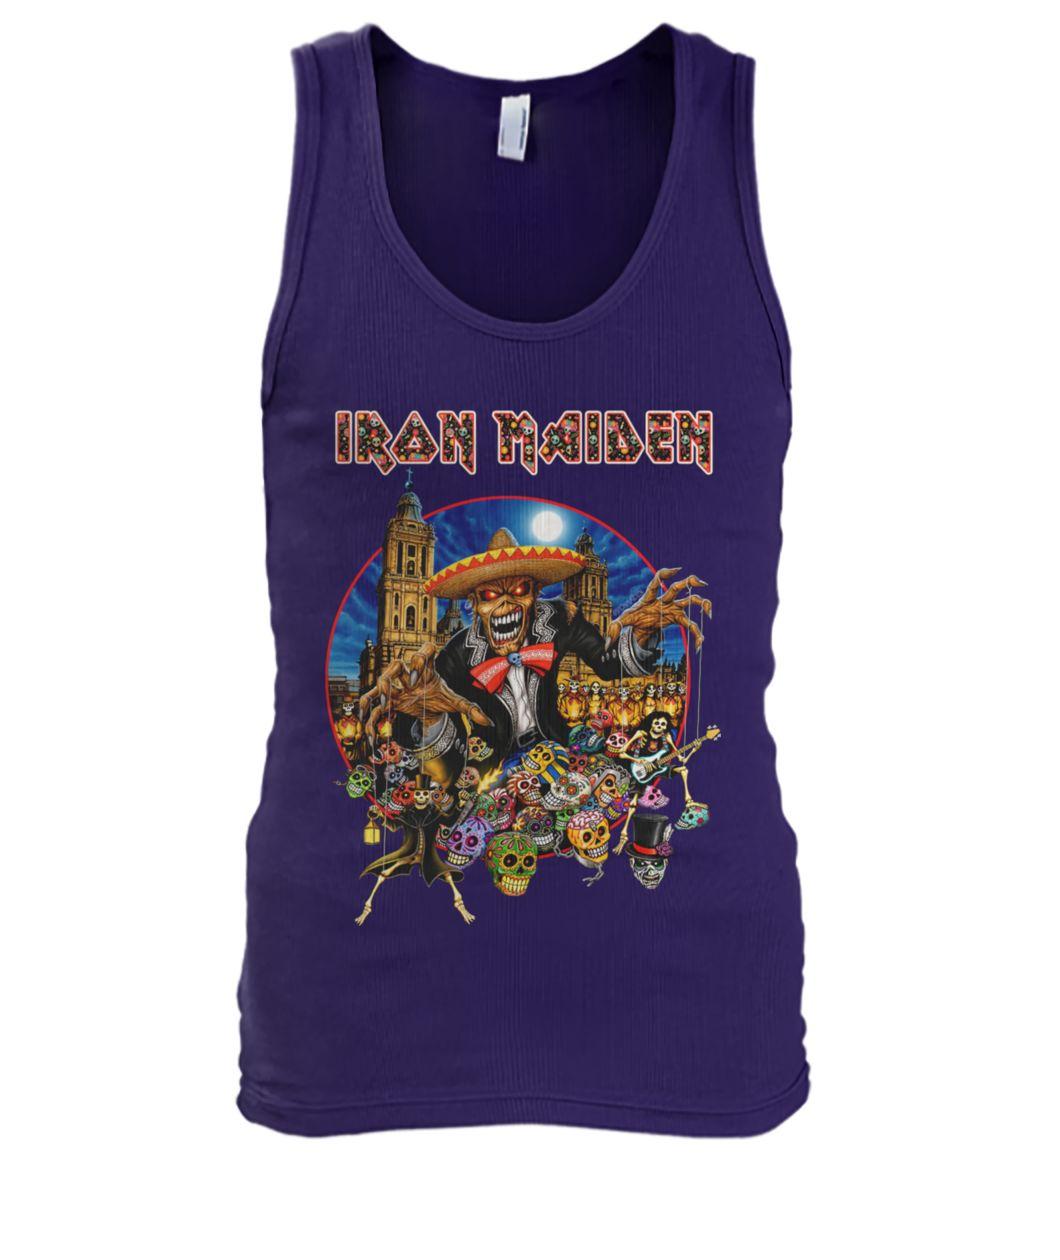 Iron maiden in the mexico city tank top